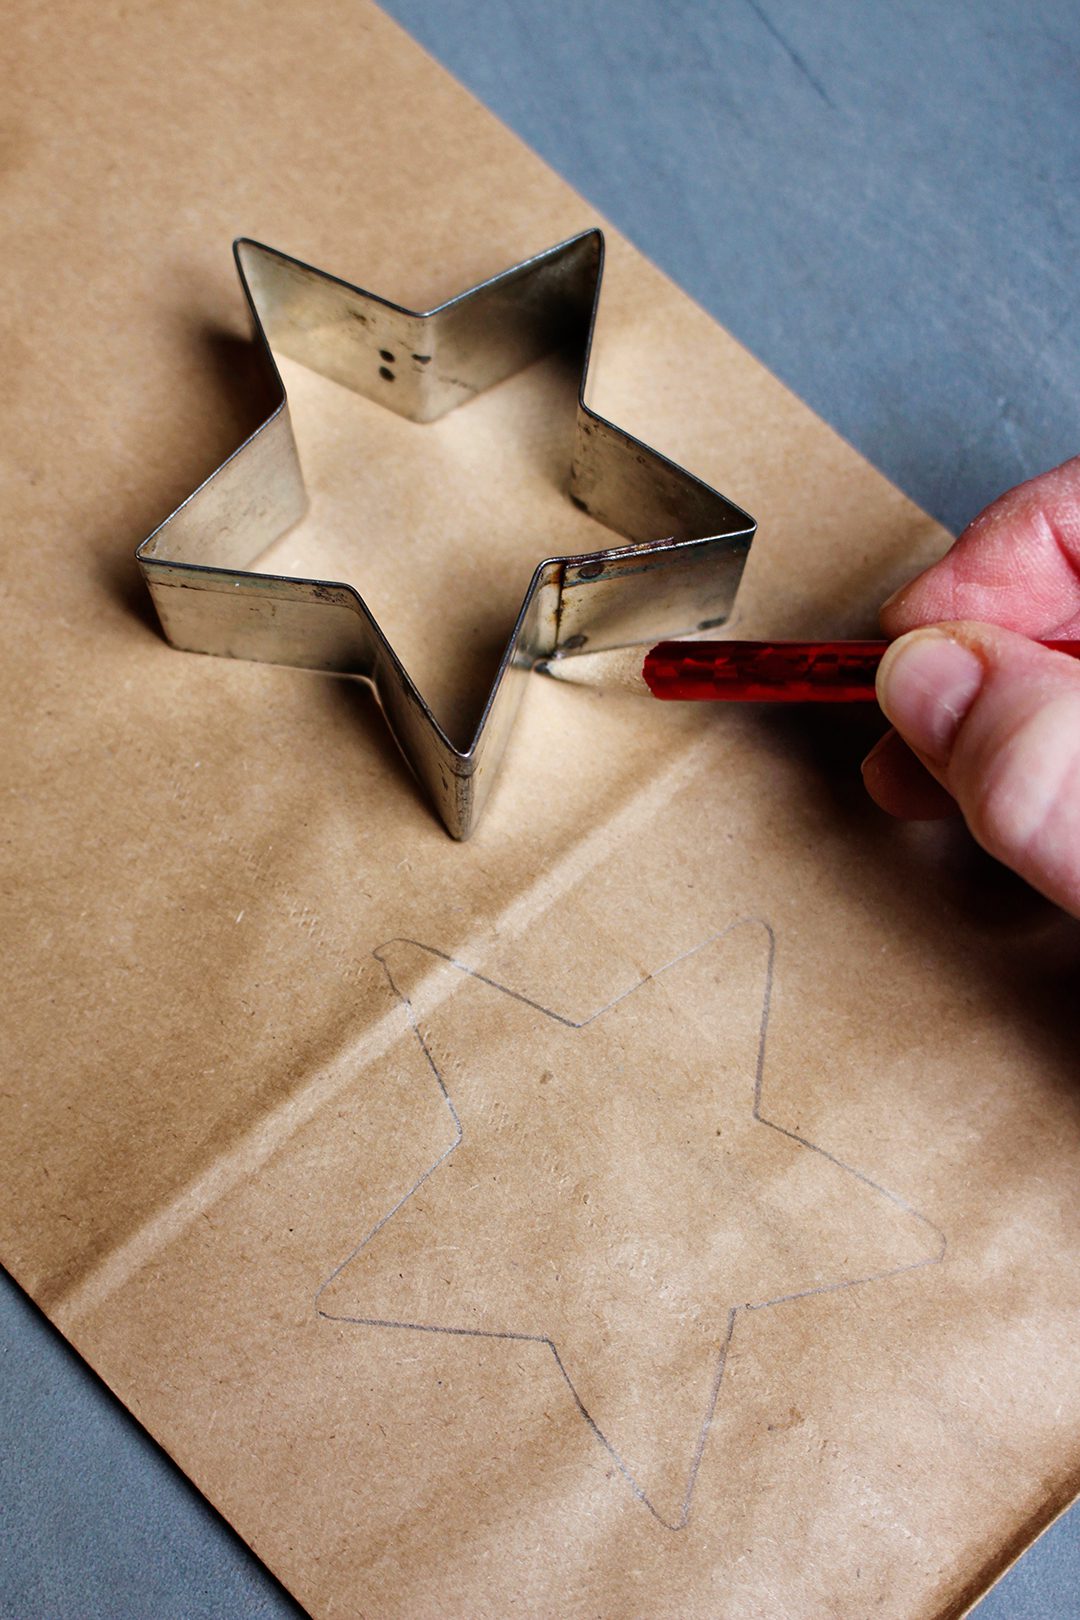 A pencil tracing around a star shaped cookie cutter on a brown paper bag.